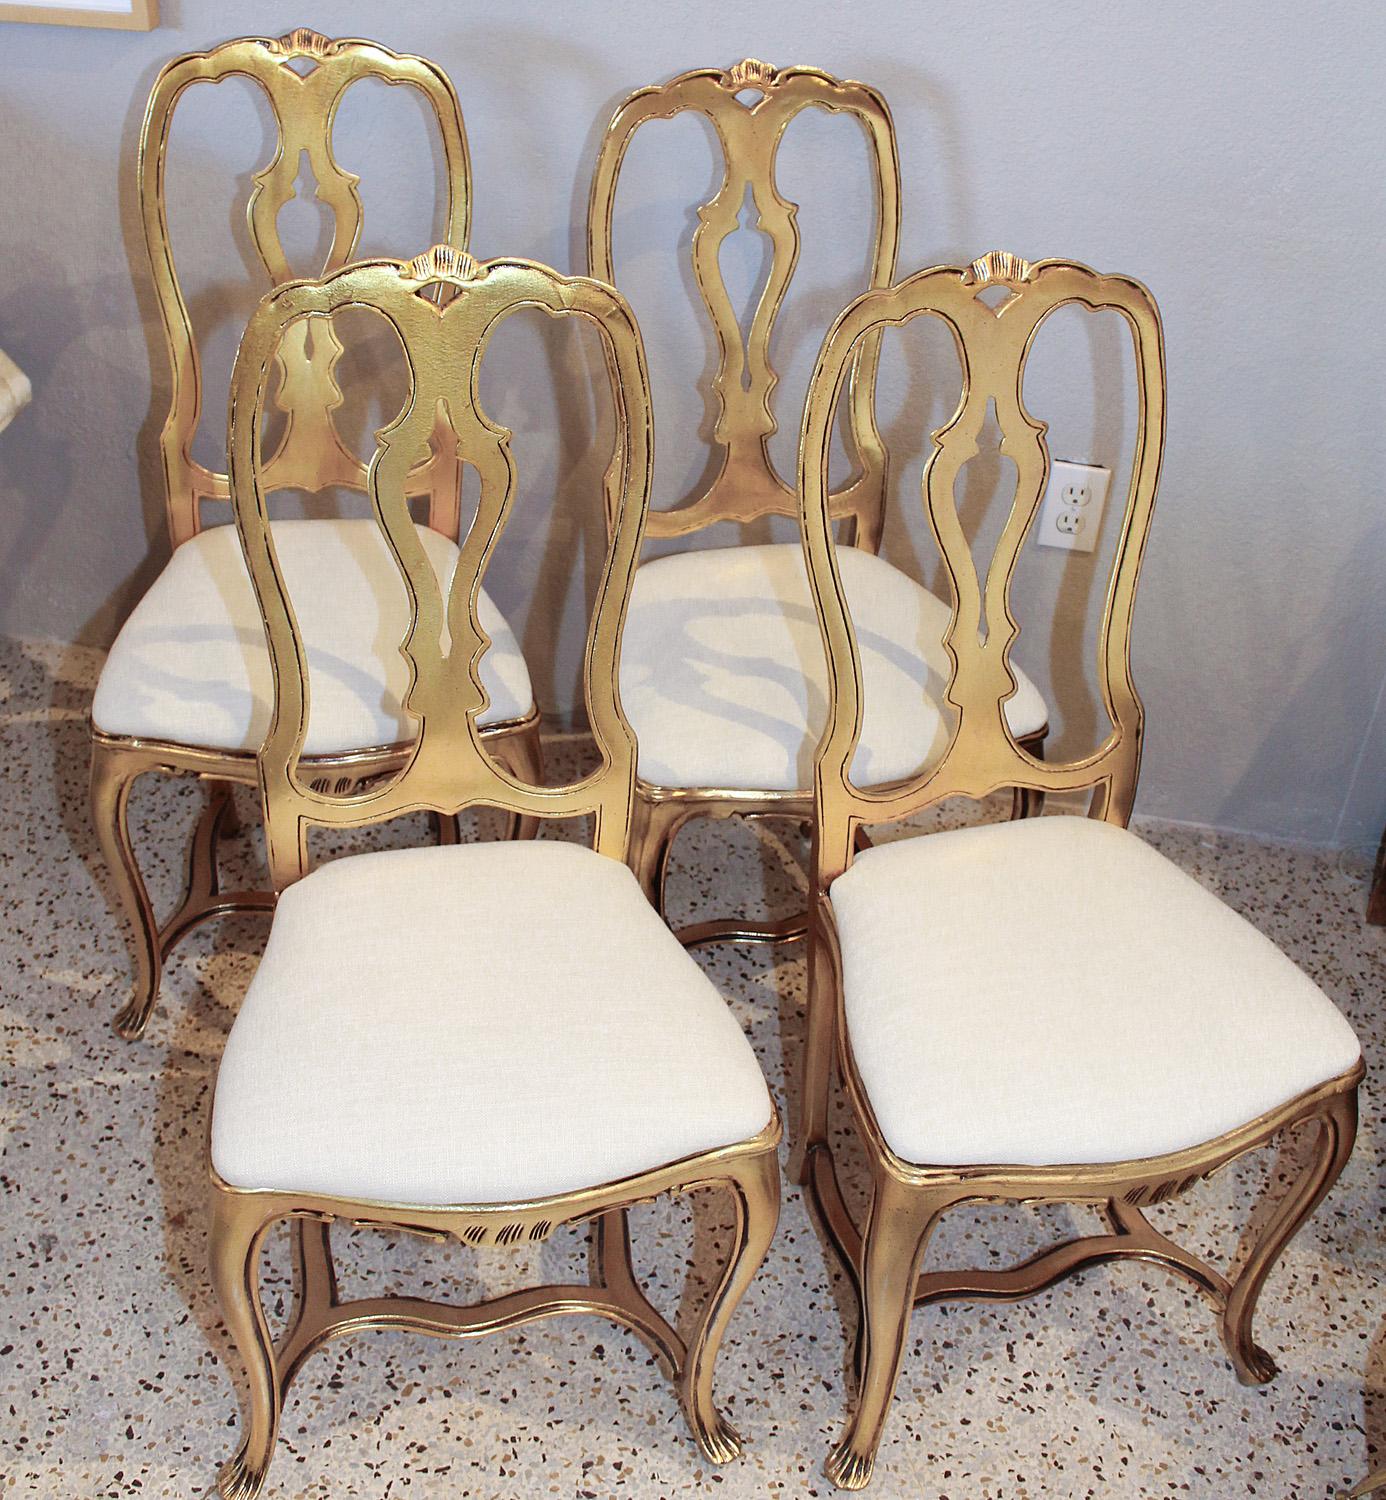 A 1970s take on a traditional form, this newly upholstered set of four Arthur Court gilded aluminum chairs is in near-pristine condition.